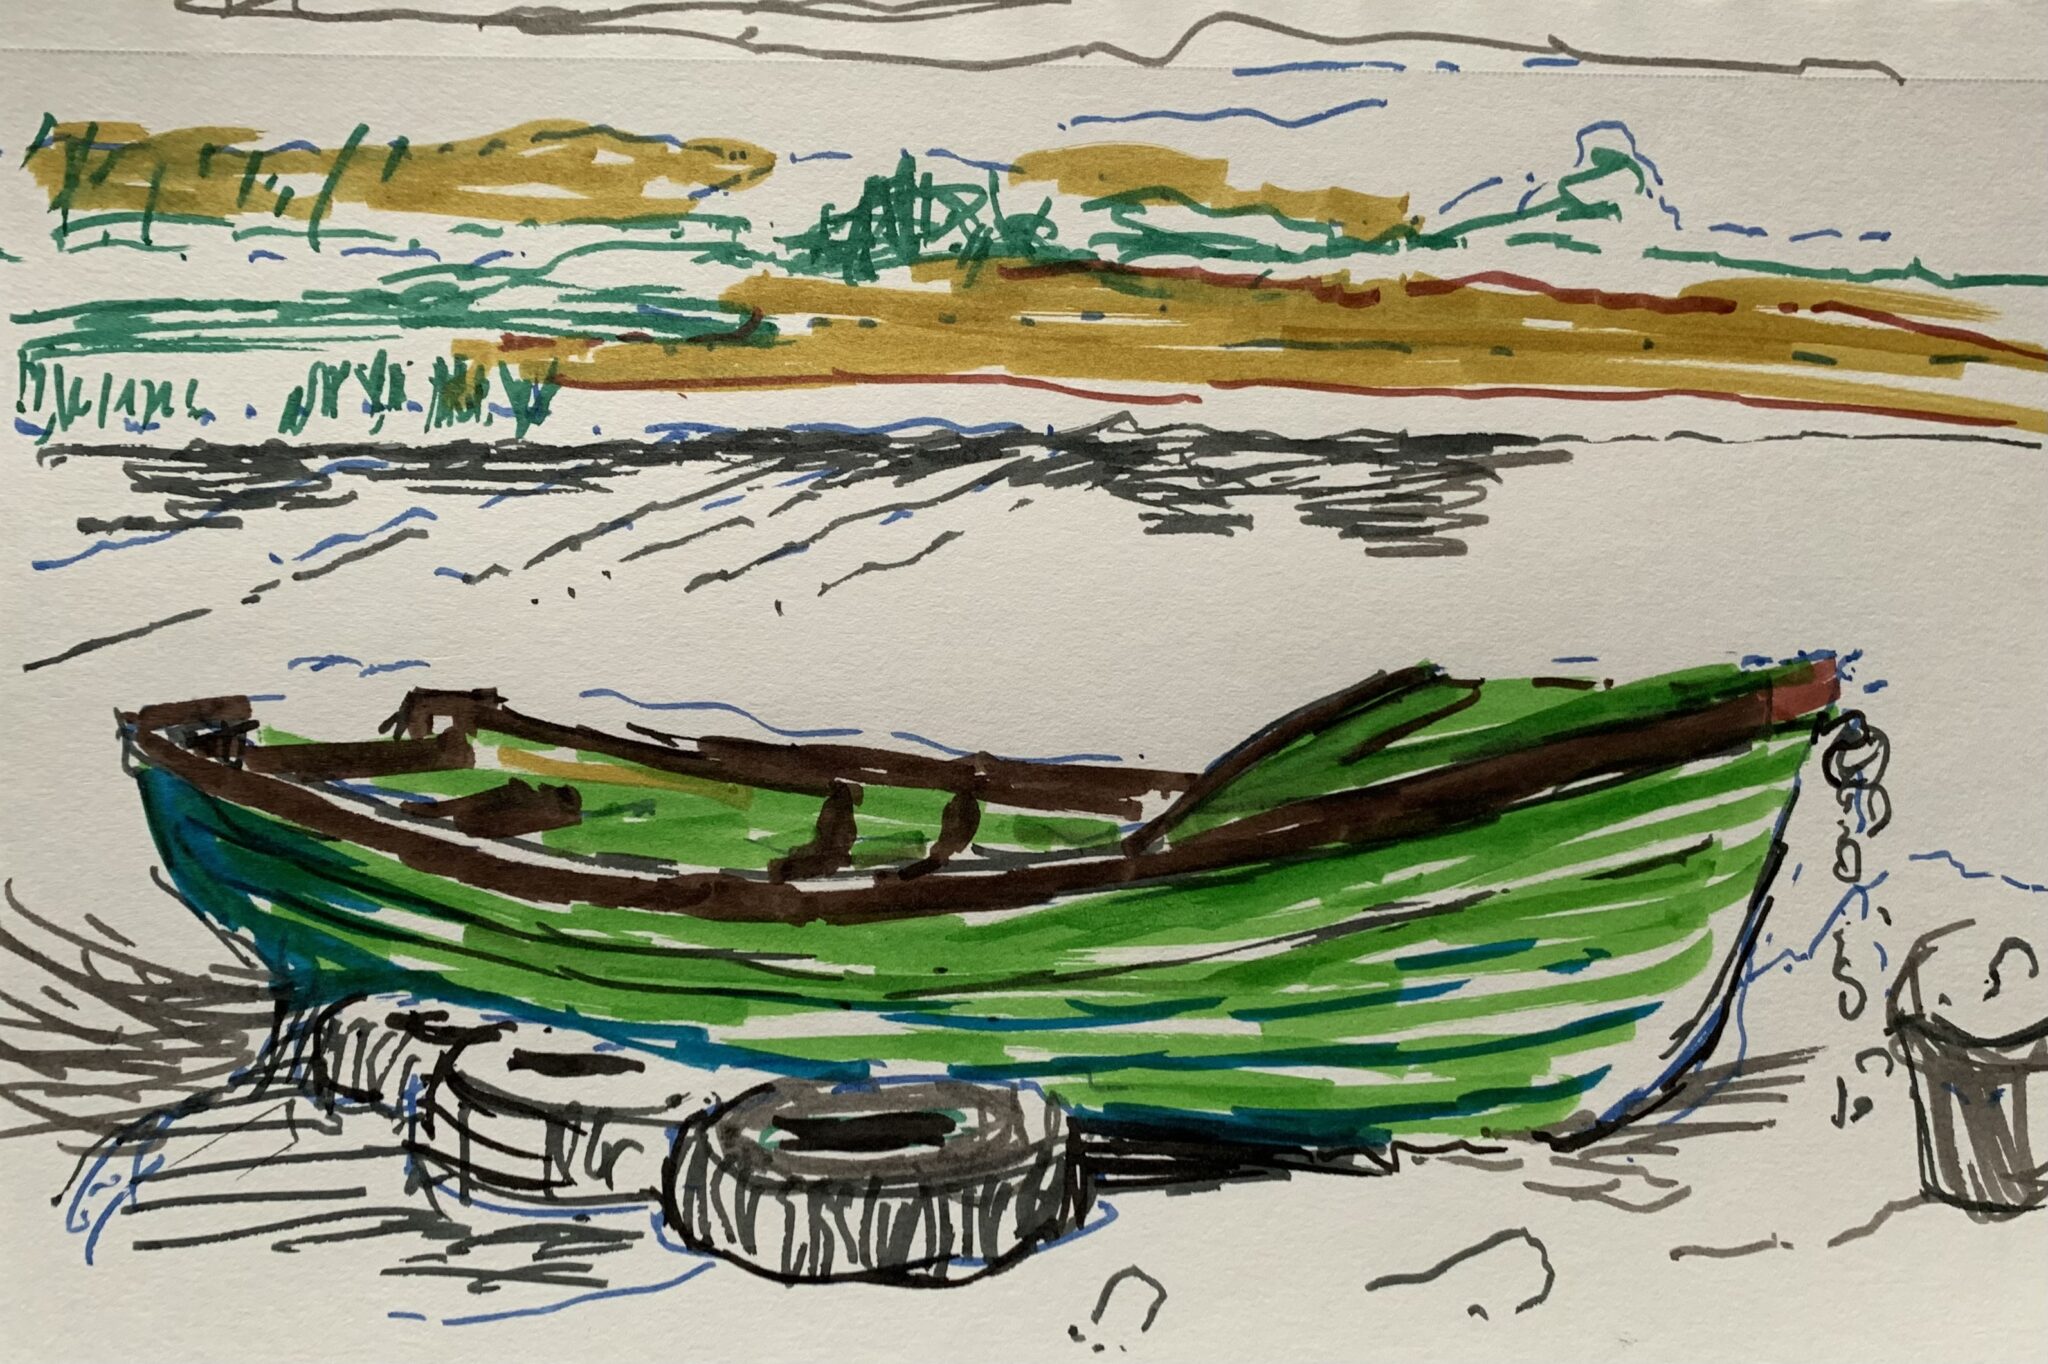 A quick rendition of a fishing boat docked onshore, using watercolor markers. Credit: Jill Tyler